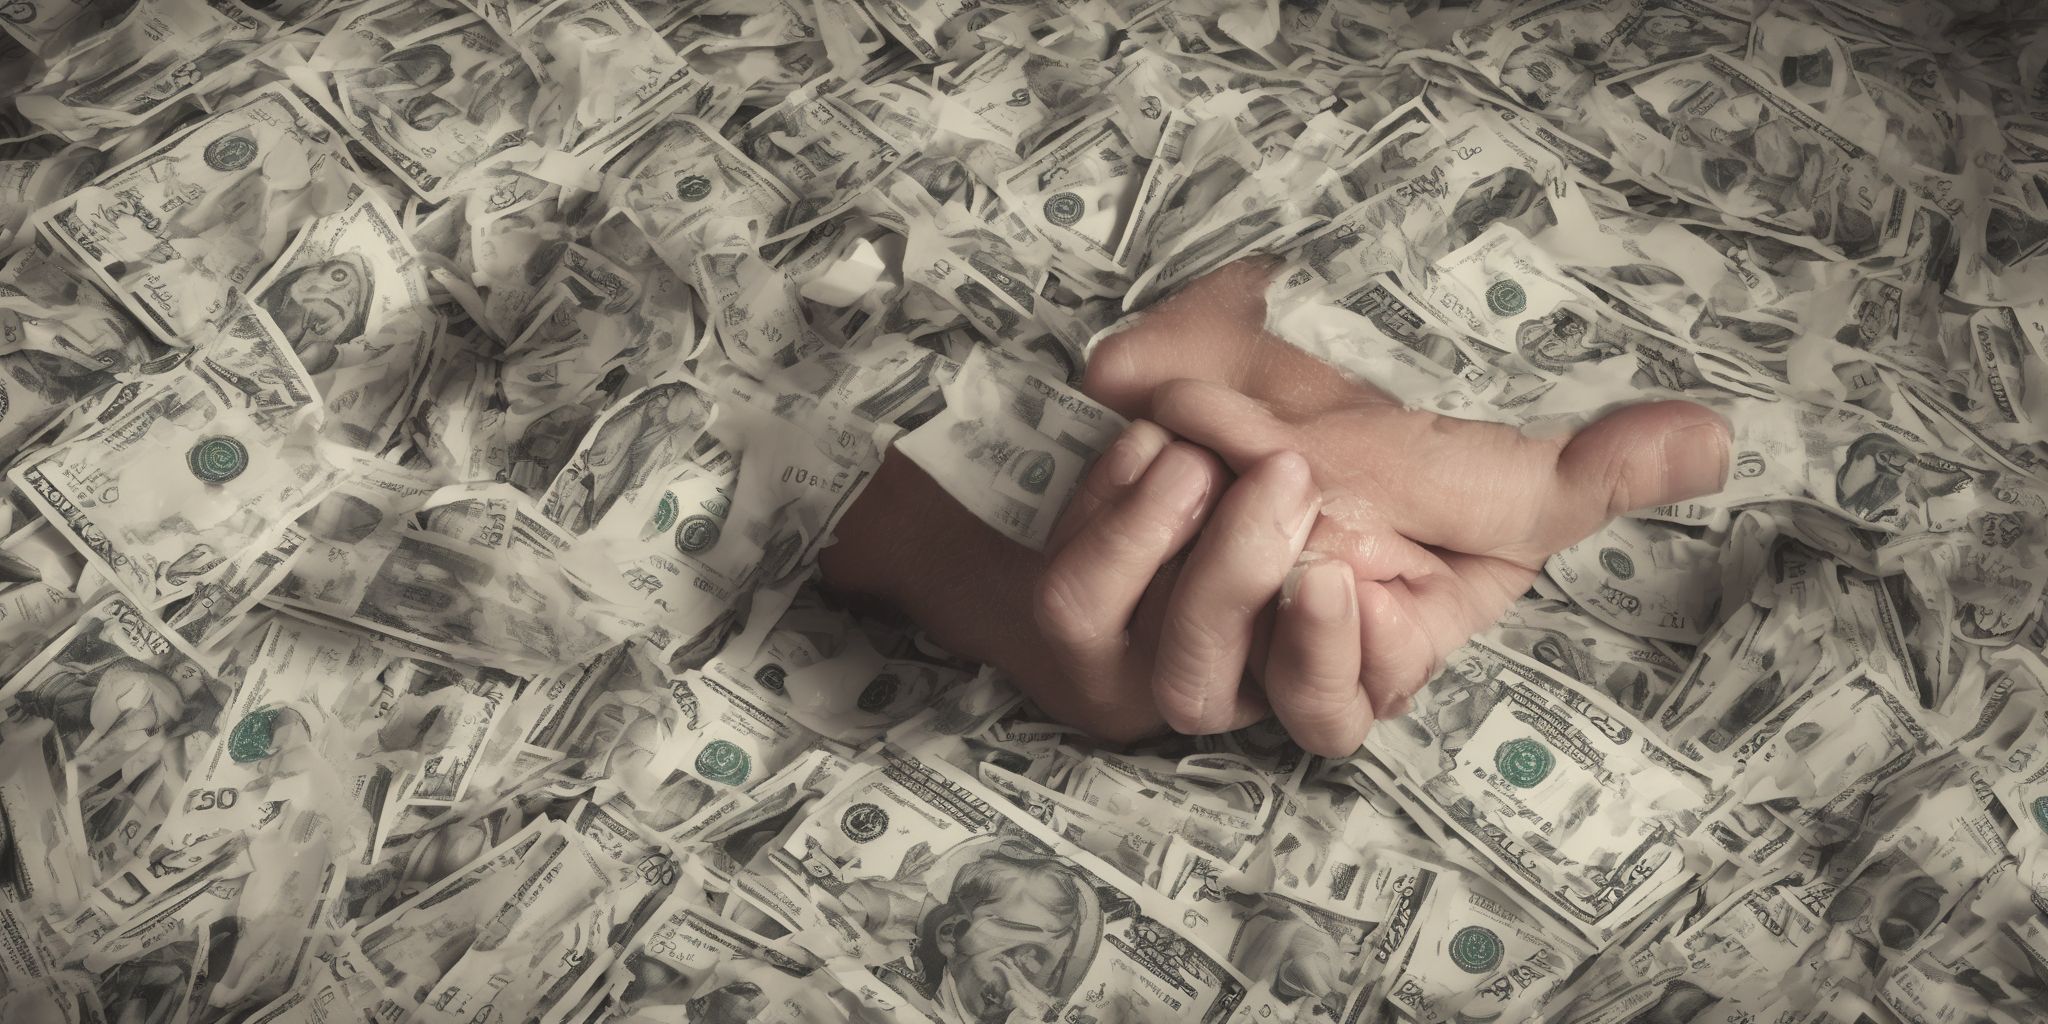 Debt forgiveness  in realistic, photographic style